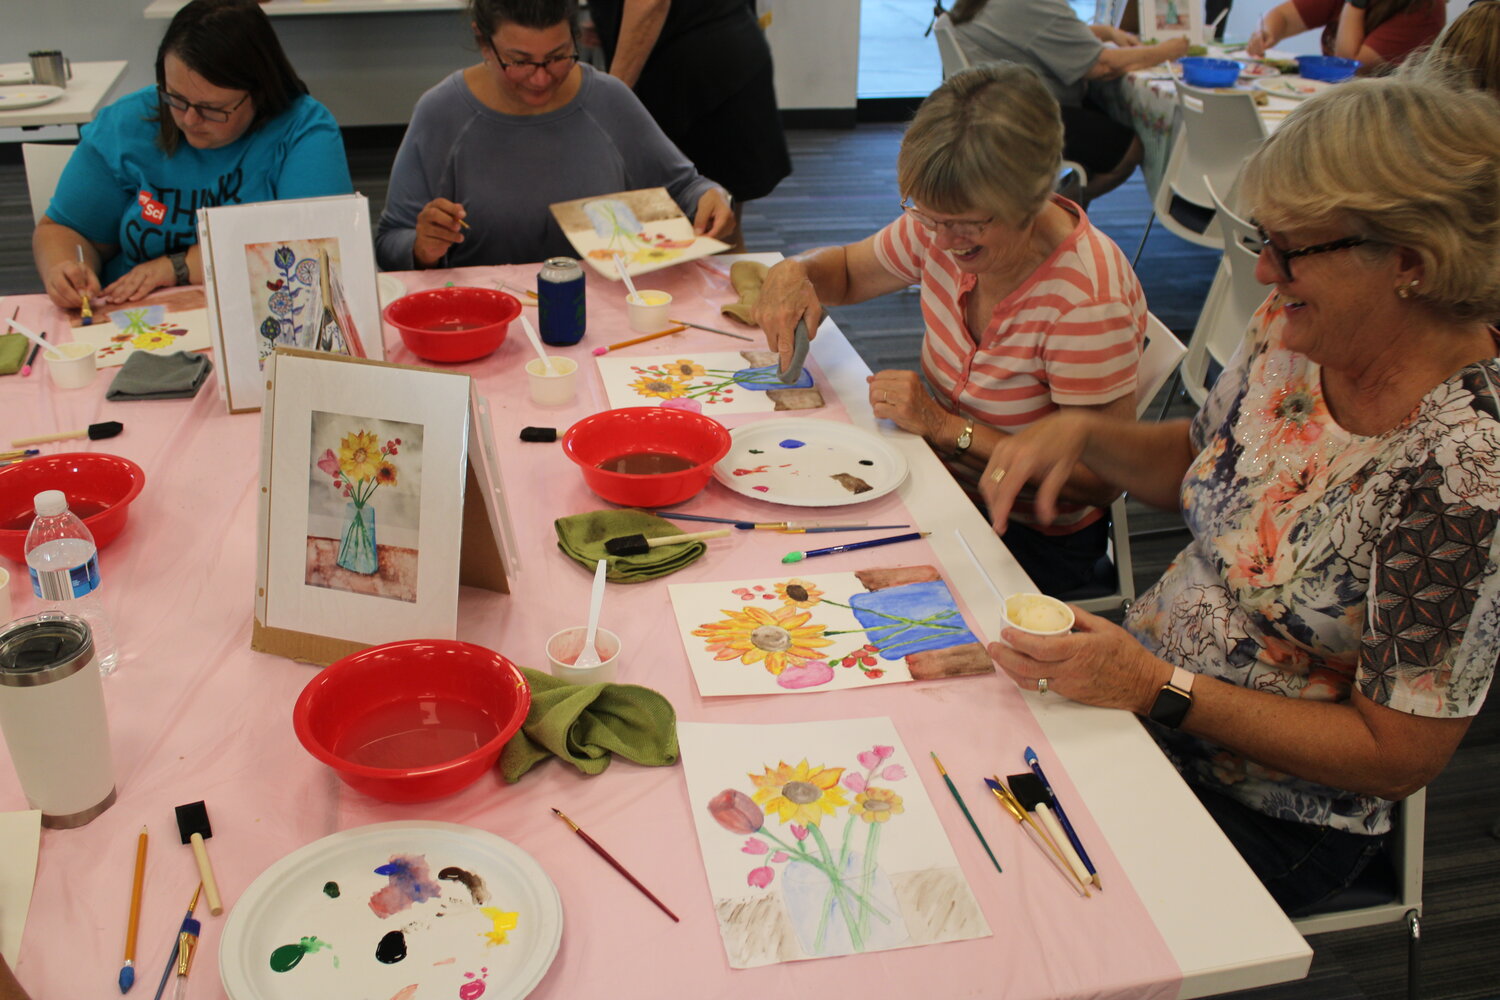 Hillary Edwards, Jaime Strauss, Terri Lenzenhuber, and Lisa Owenby work on their designs while also enjoying each other's company during the watercolor event at the library.